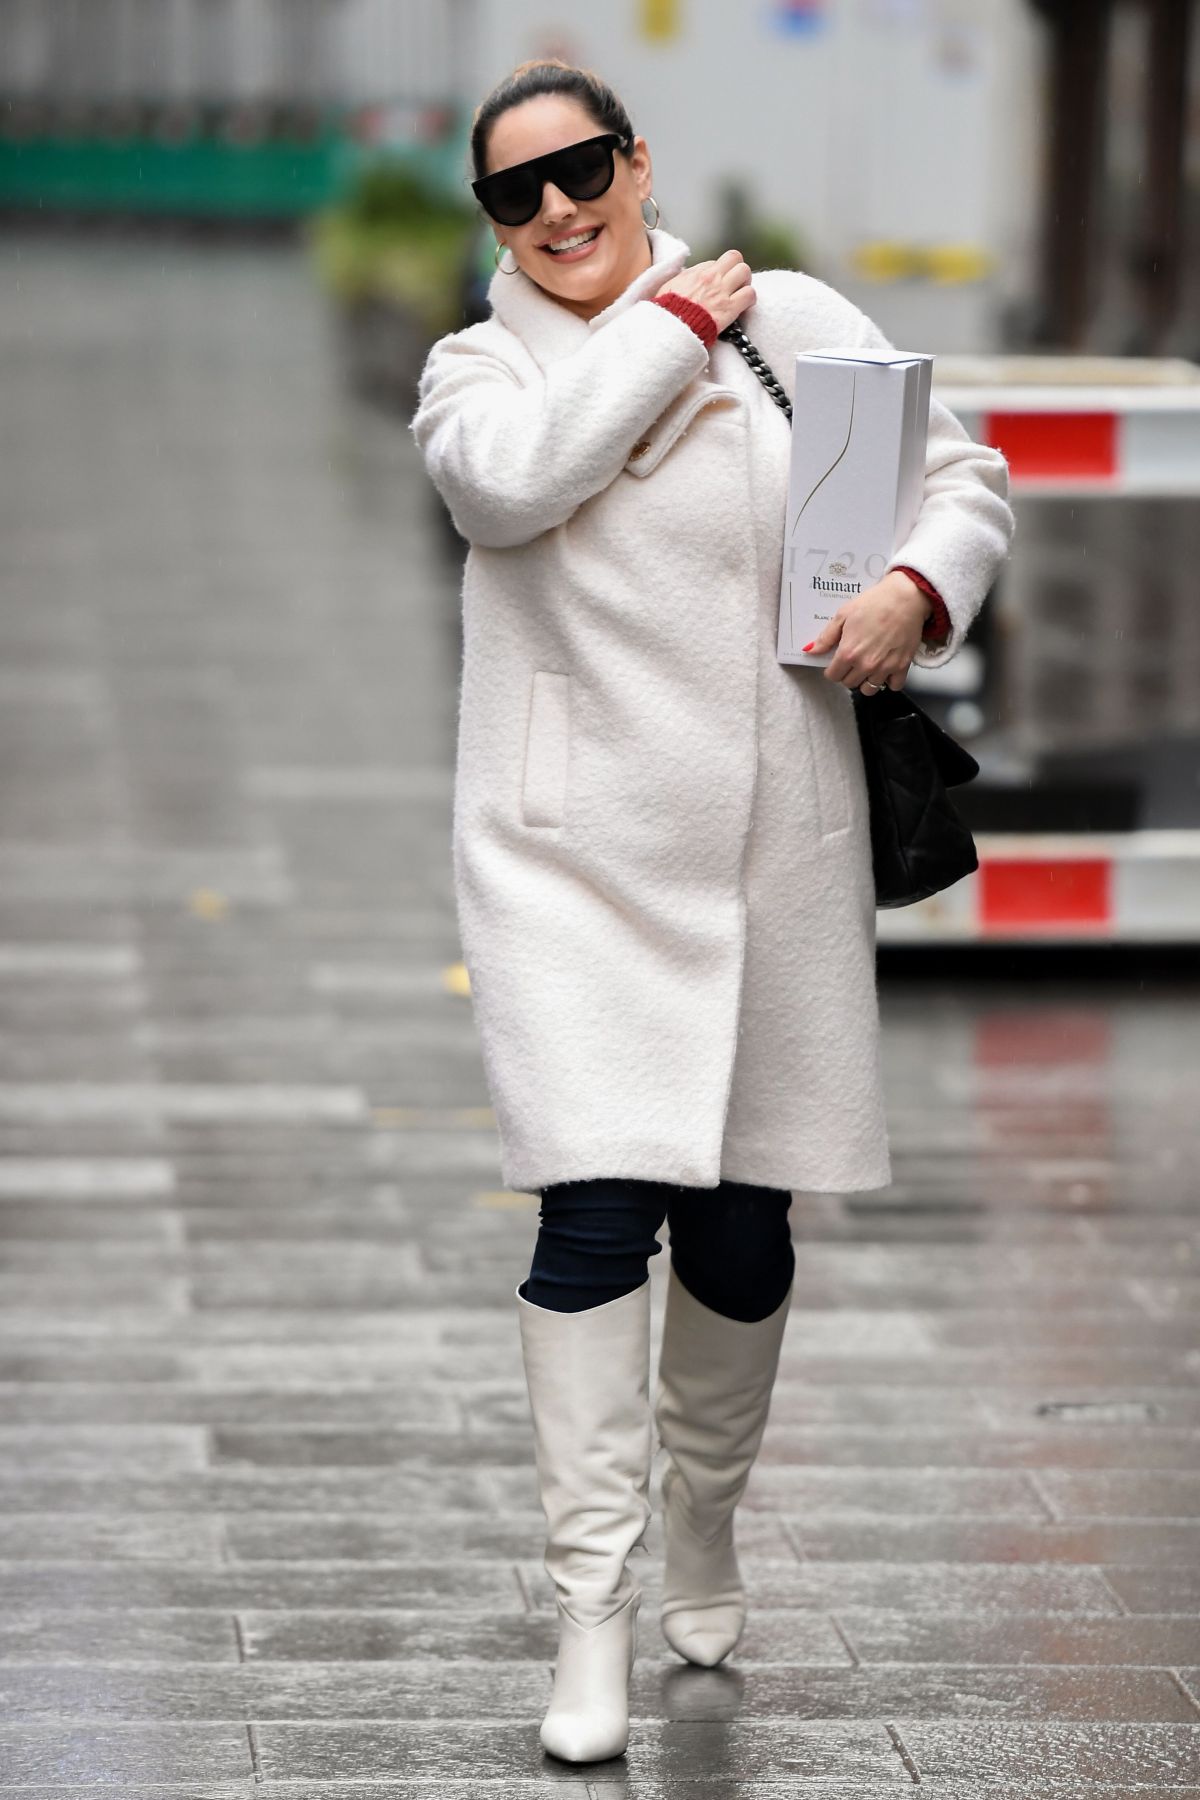 179310289_kelly-brook-in-a-white-coat-and-boots-at-global-radio-in-london-12-23-2020-5.jpg